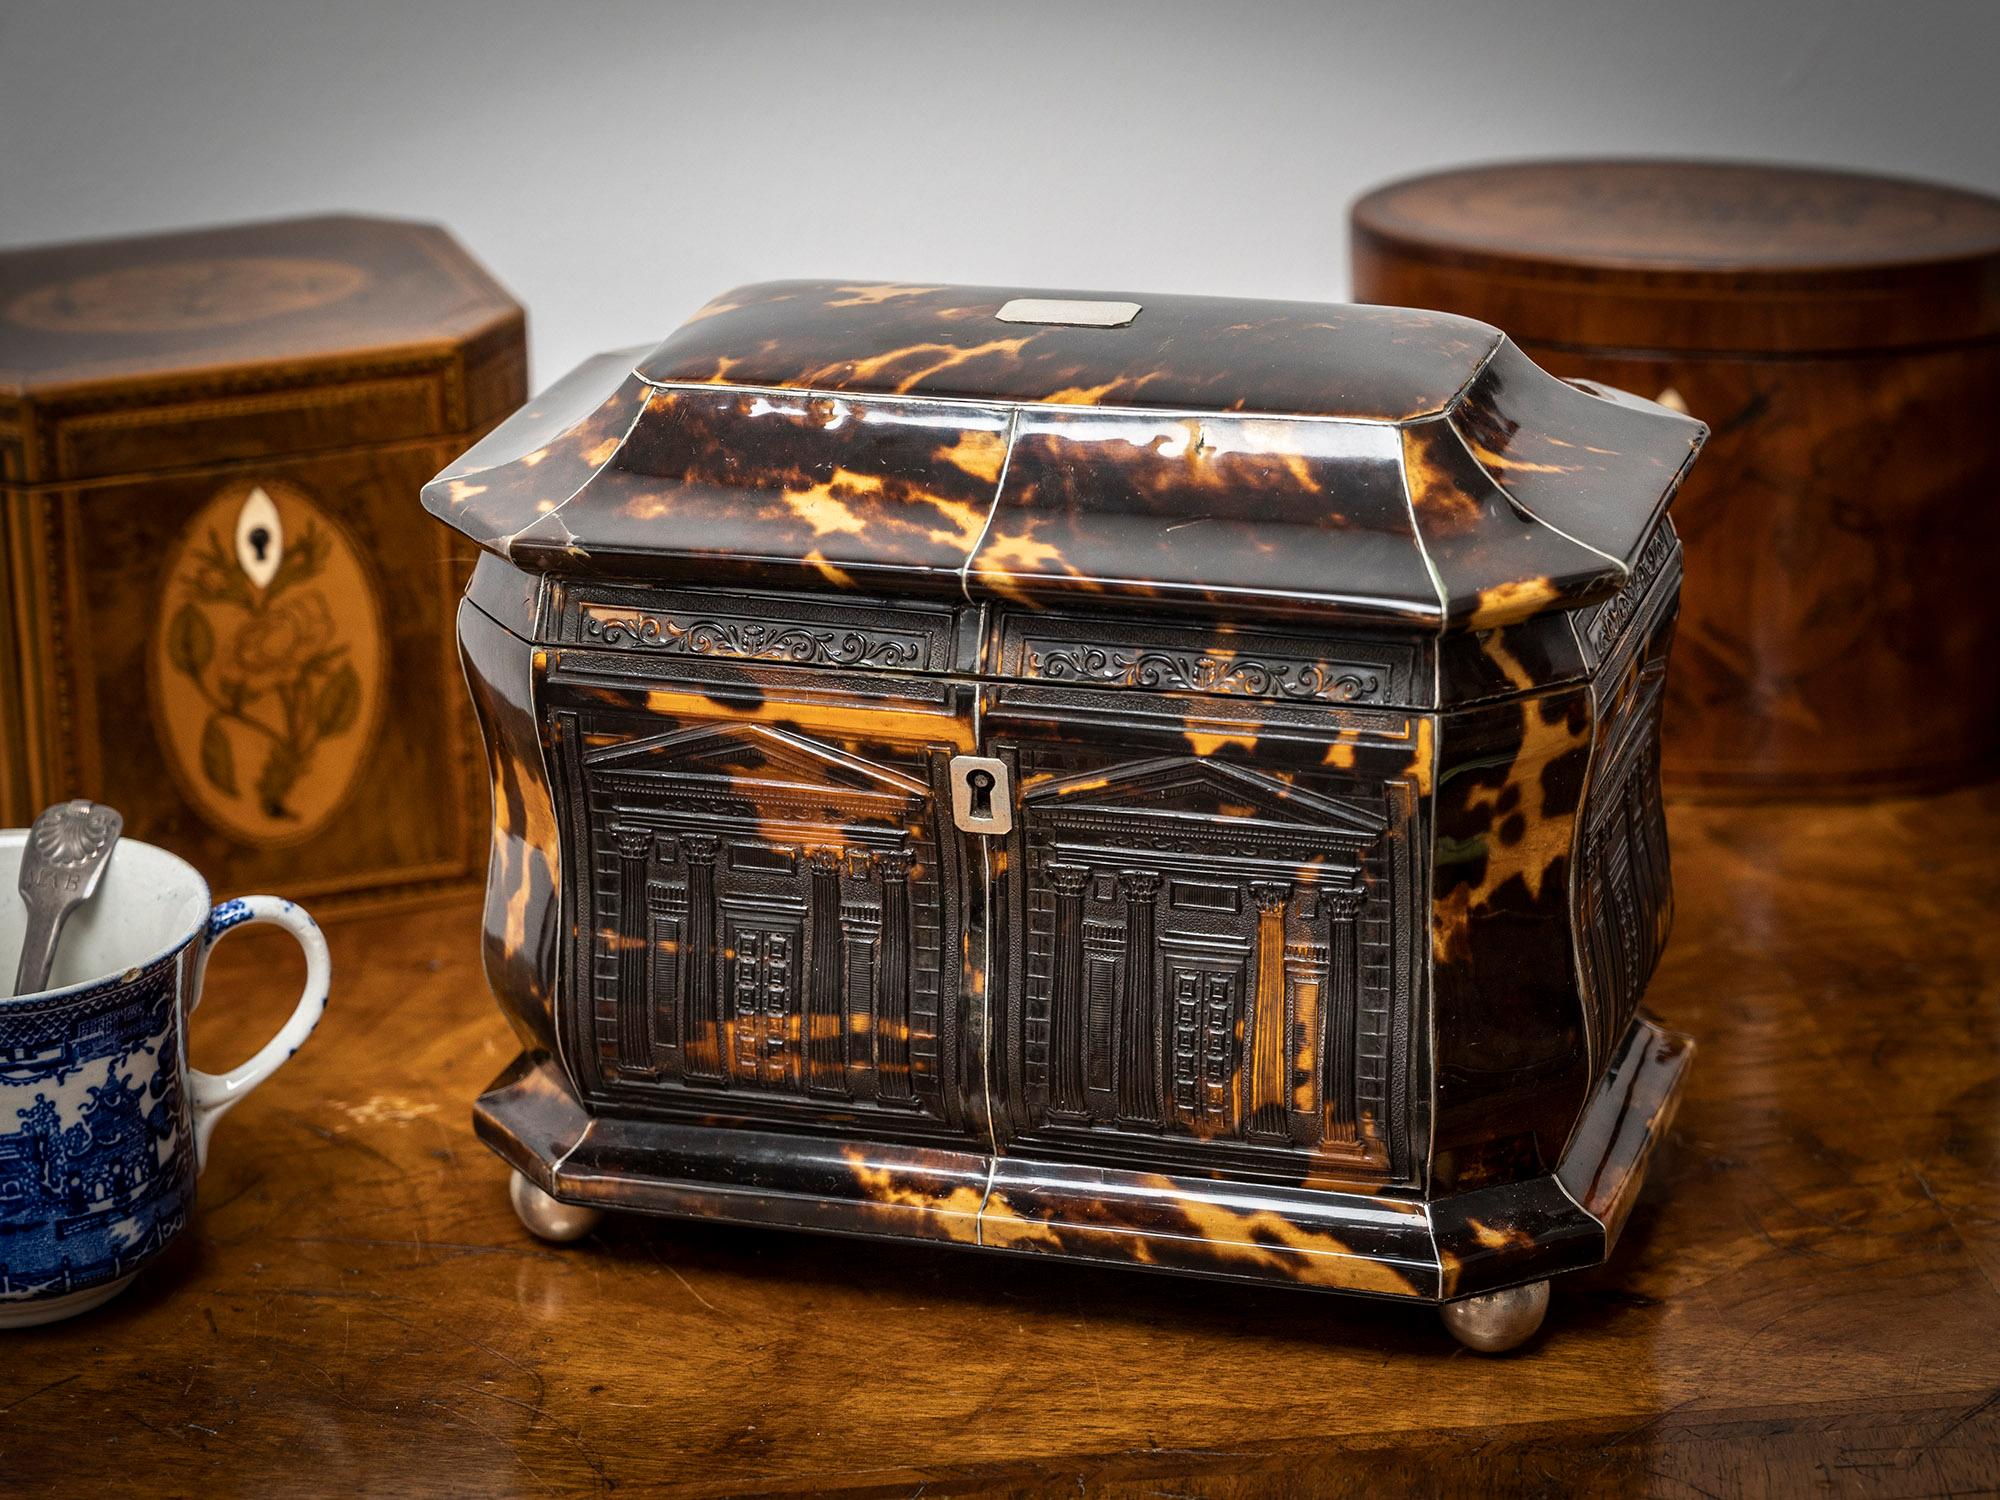 Pressed Tortoiseshell Design

From our Tea Caddy collection, we are delighted to offer this Regency Architectural Tortoiseshell Tea Caddy. The Tea Caddy of bombe form with flared base, canted corners and pagoda top finished with silver stringing and